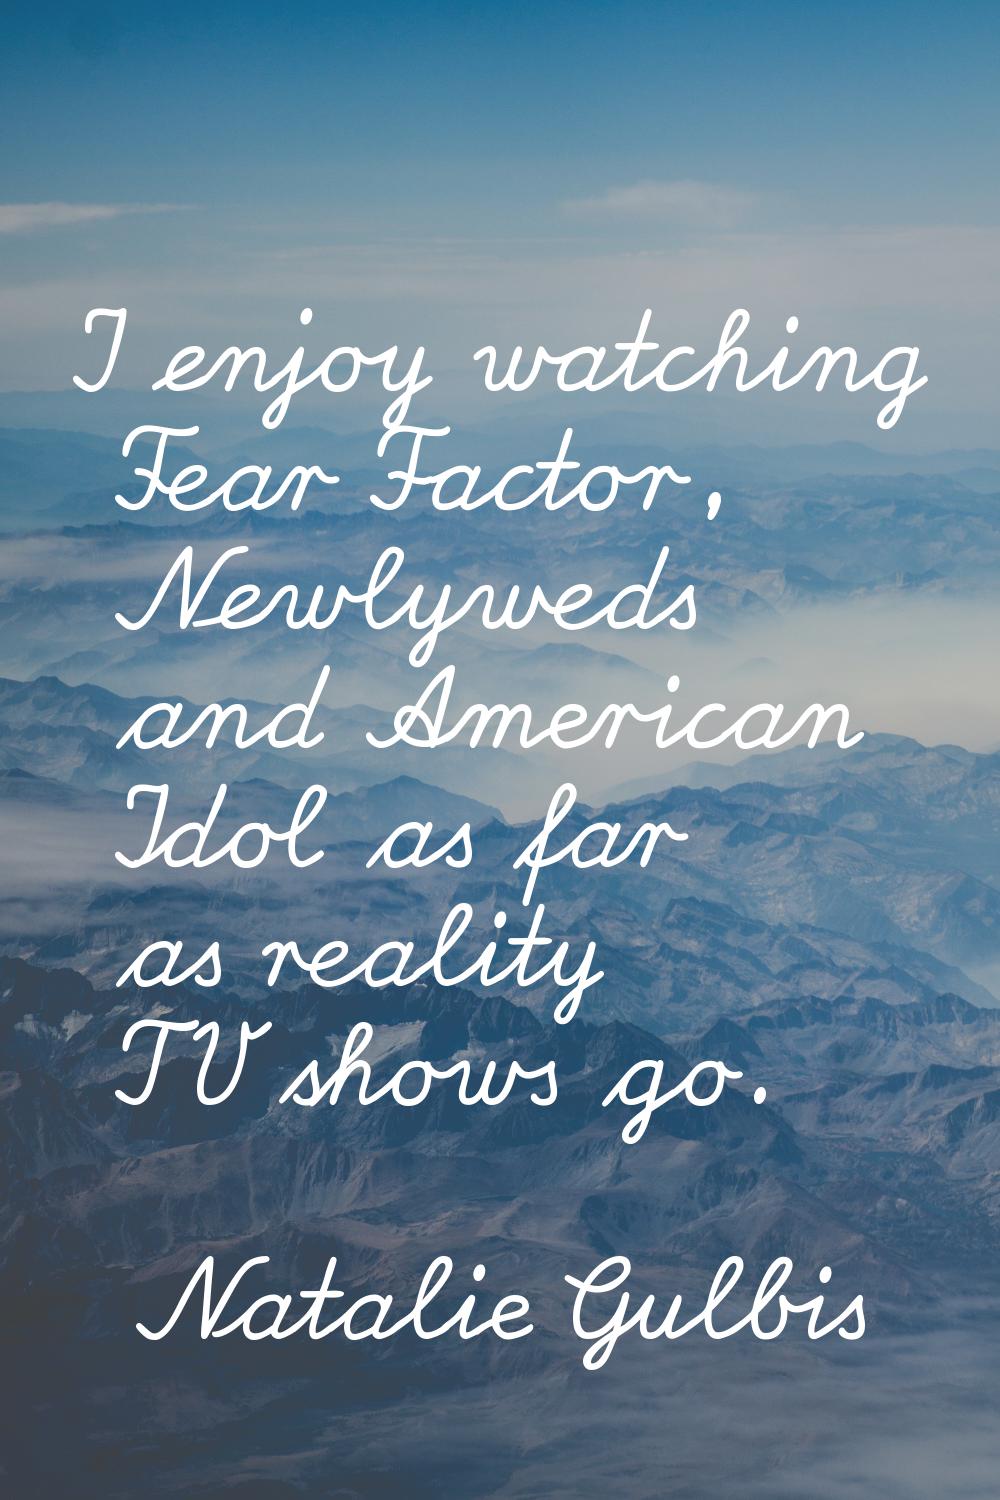 I enjoy watching Fear Factor, Newlyweds and American Idol as far as reality TV shows go.